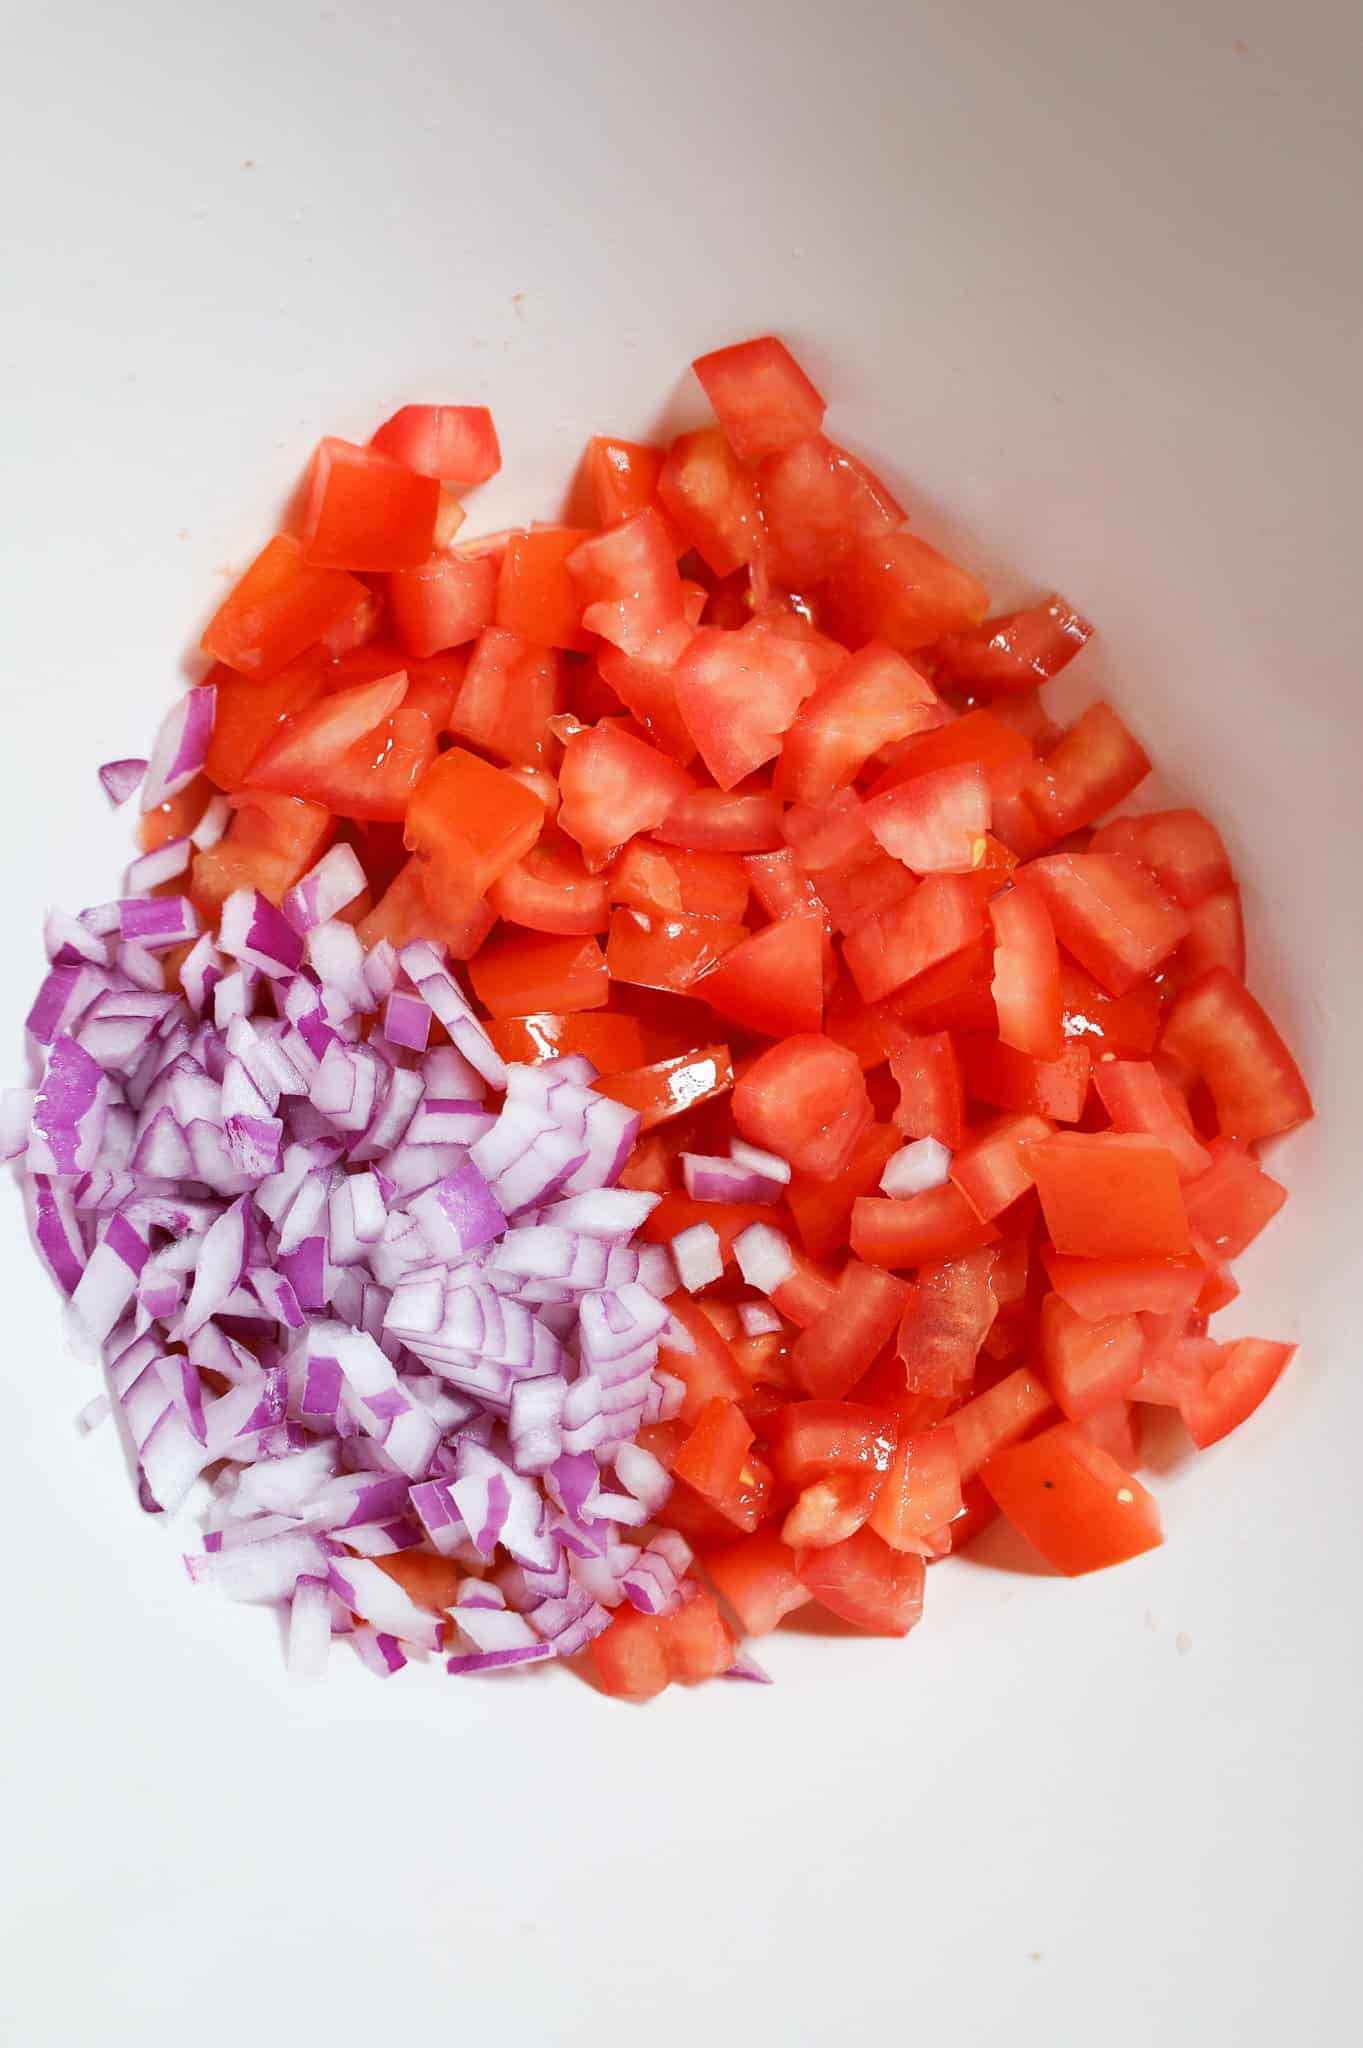 diced red onions and diced tomatoes in a mixing bowl